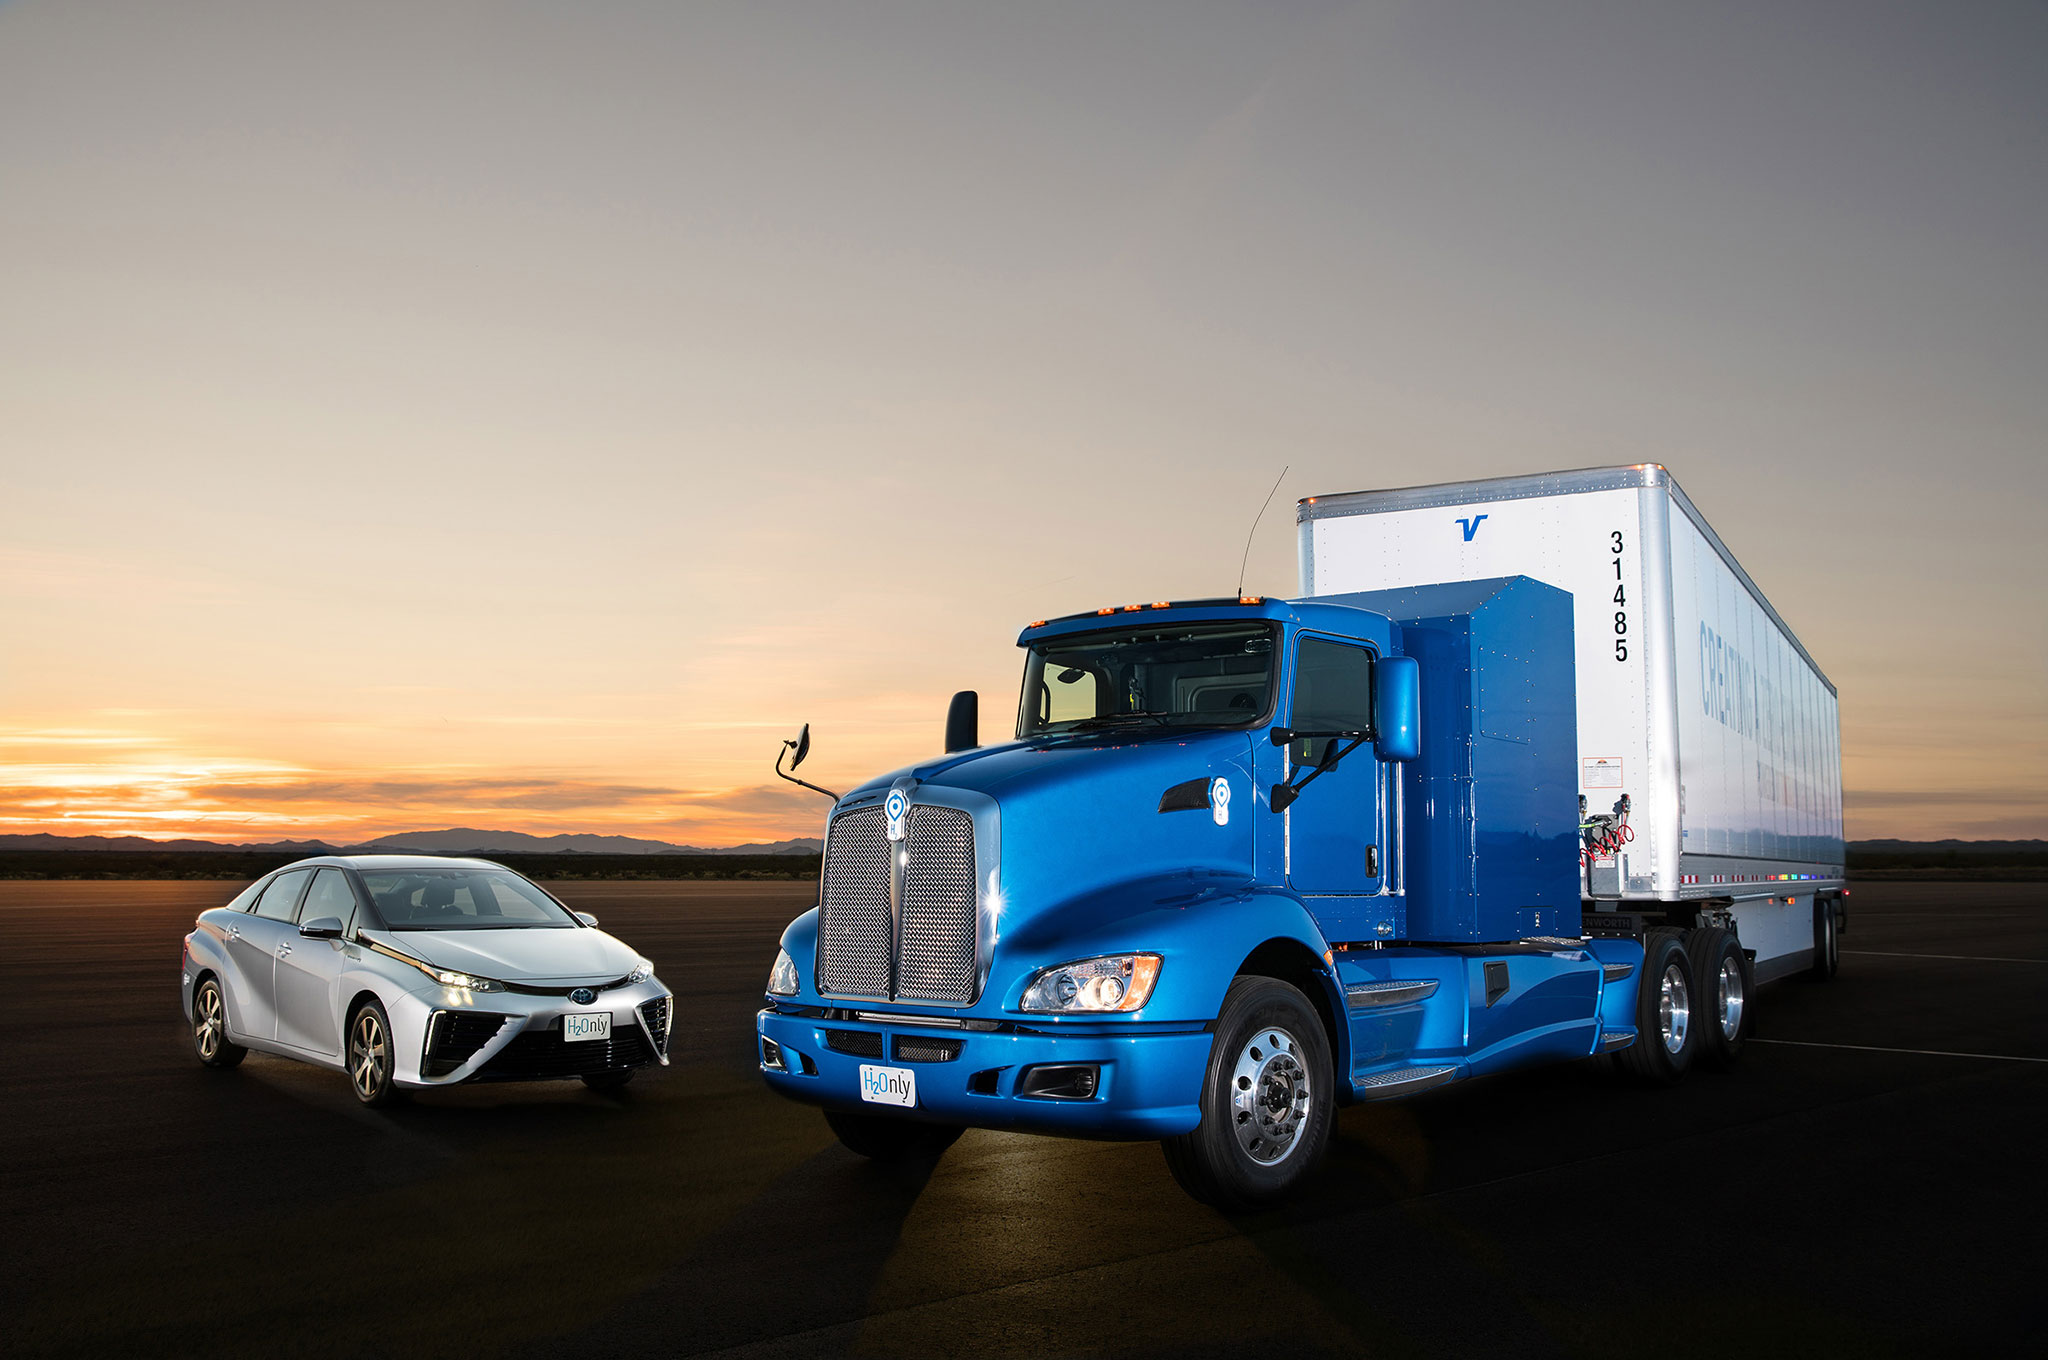 Toyota Project Portal Fuel Cell Truck 